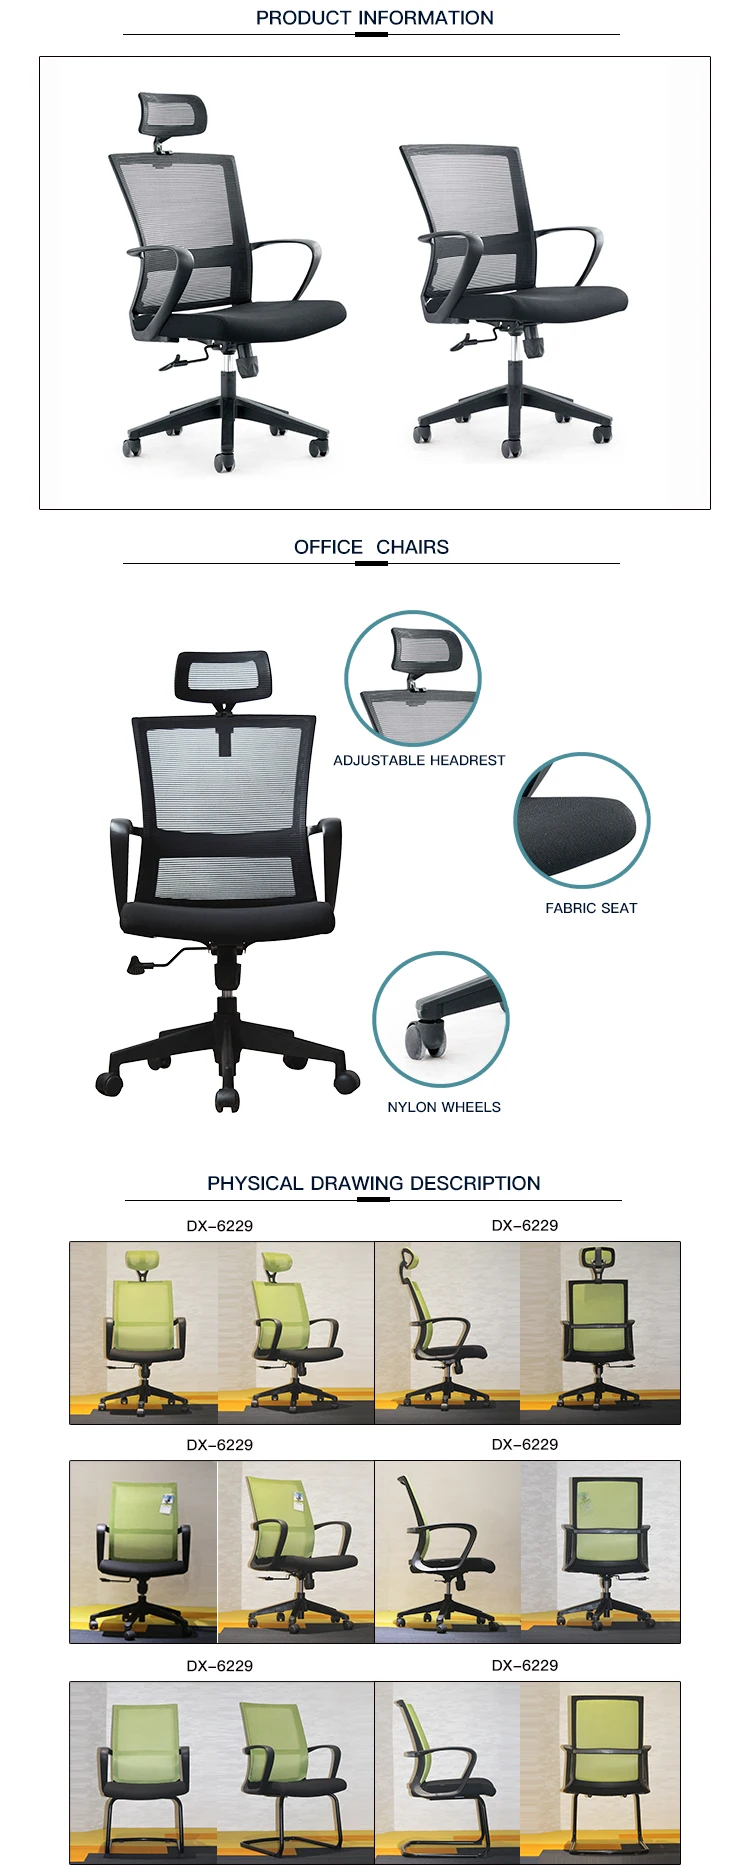 High back full mesh chair office furniture adjustable height swing manager chairs with wheels